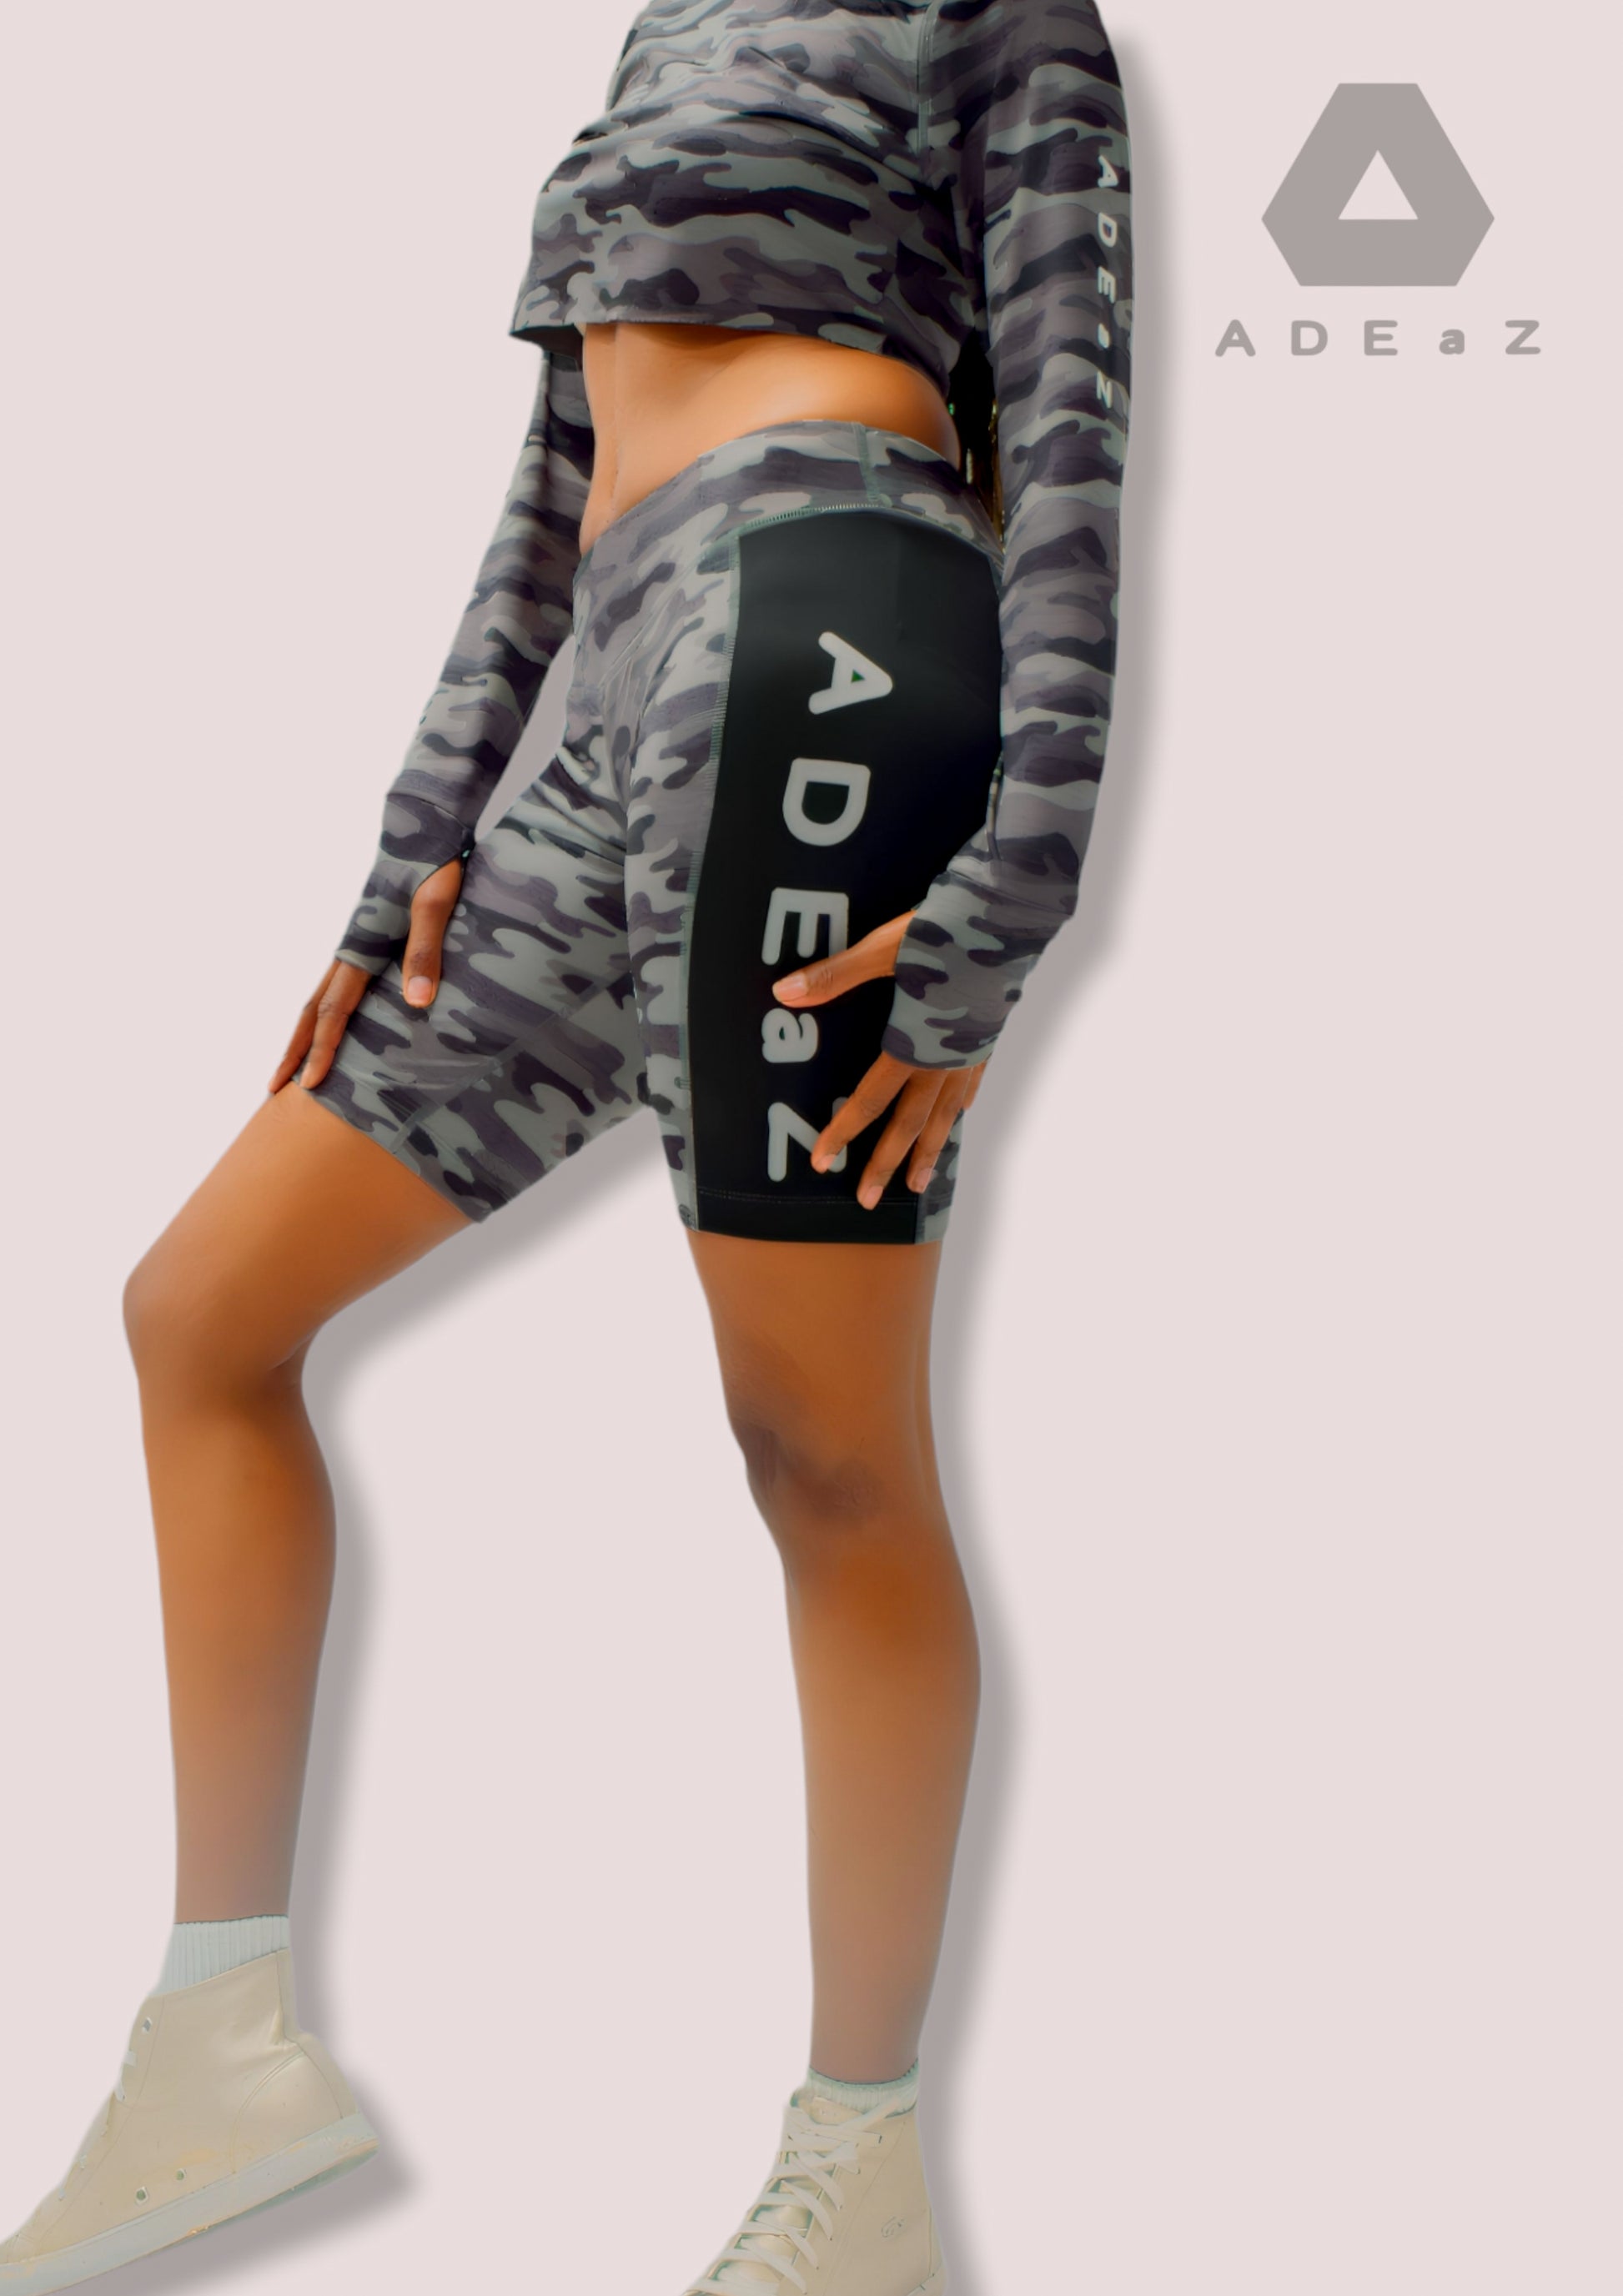 Ladies Camo Shorts: Fashionable camouflage-patterned shorts designed for comfort and style